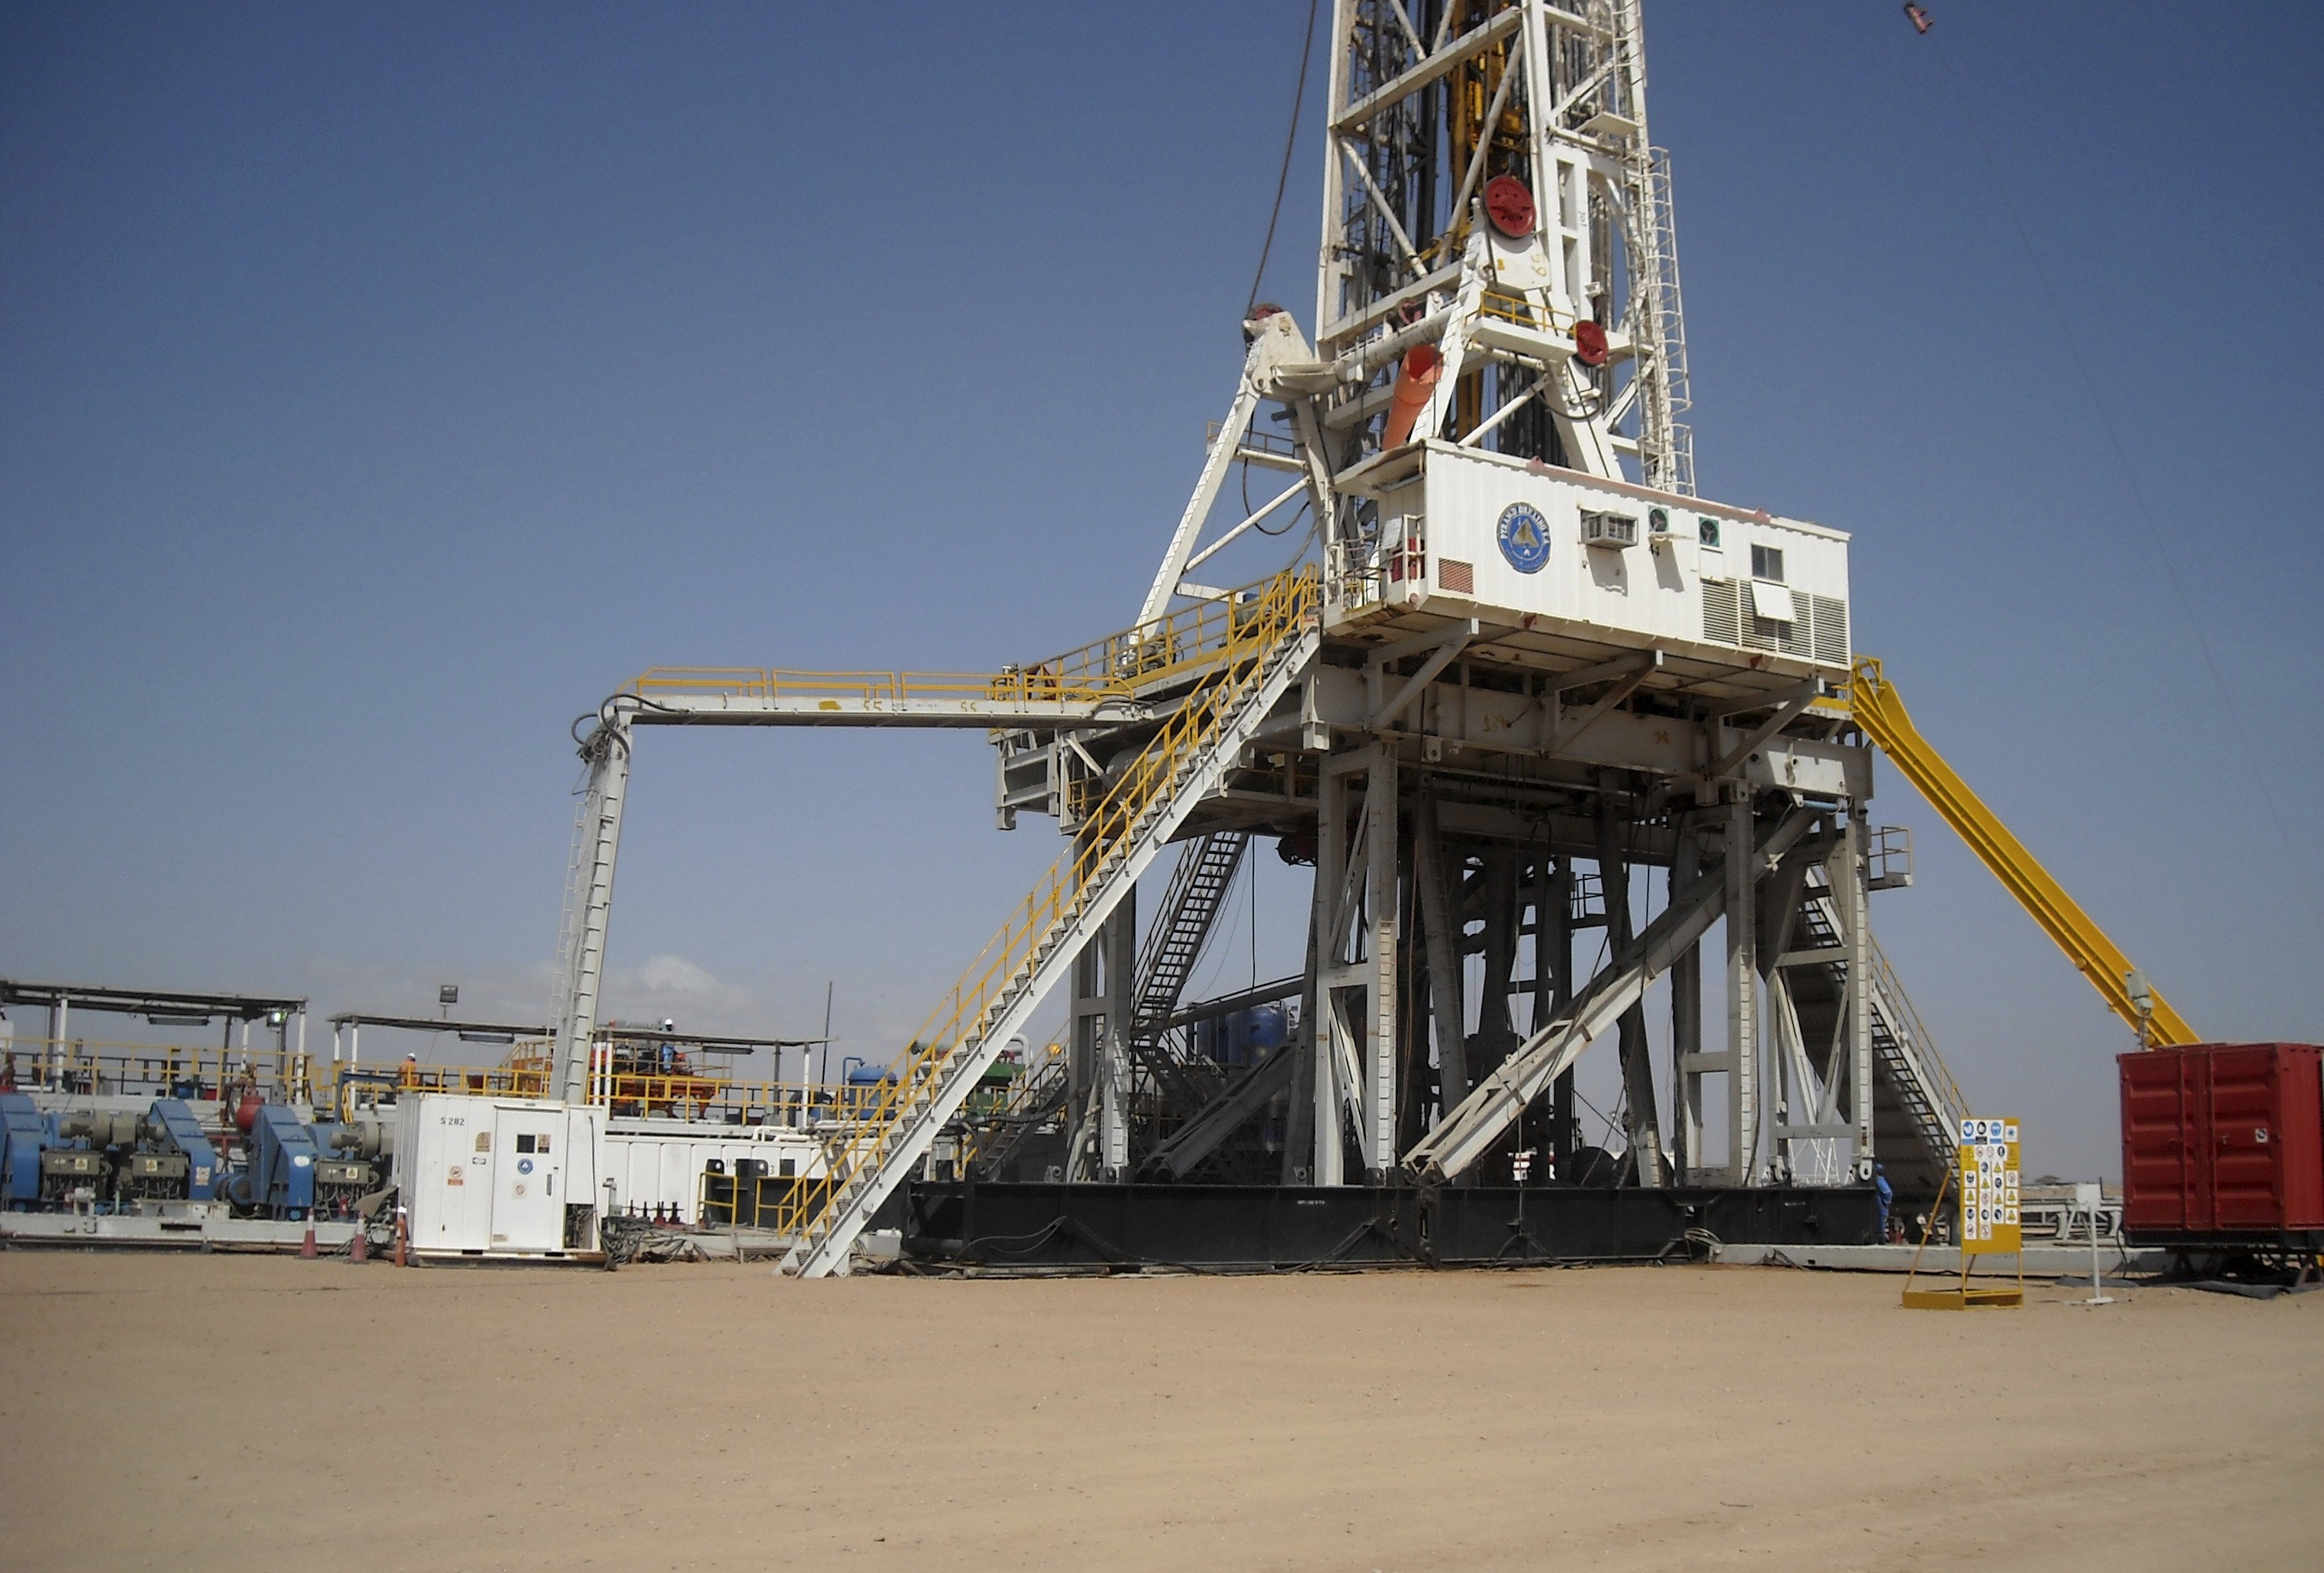 File photo of a general view showing the Paipai-1 drill site in Turkana, northern Kenya